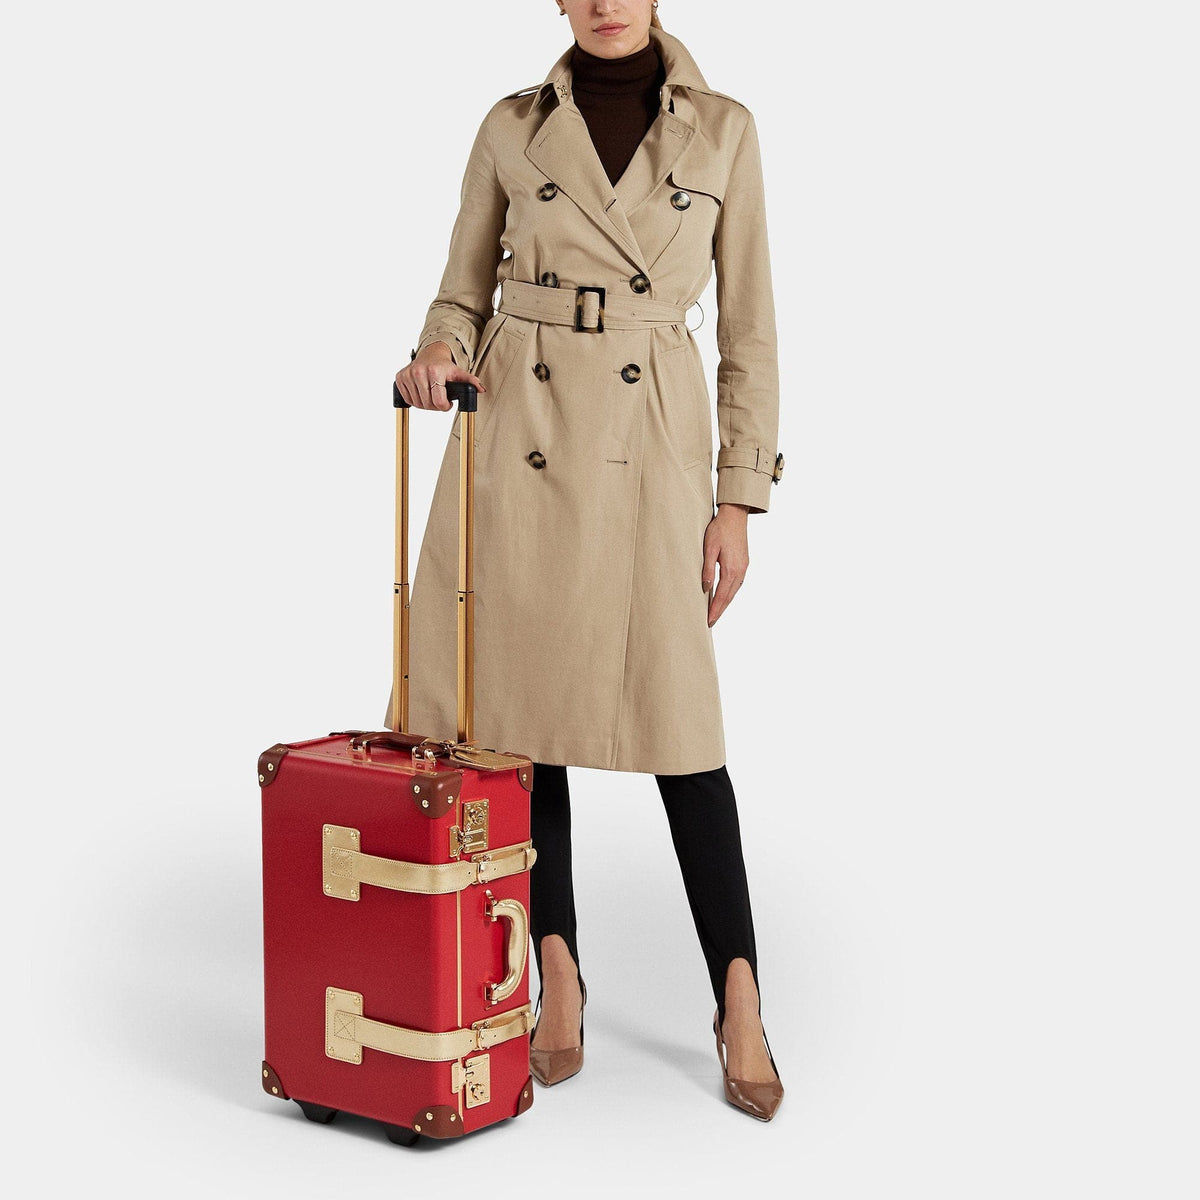 The Soprano - Red Carryon Carryon Steamline Luggage 